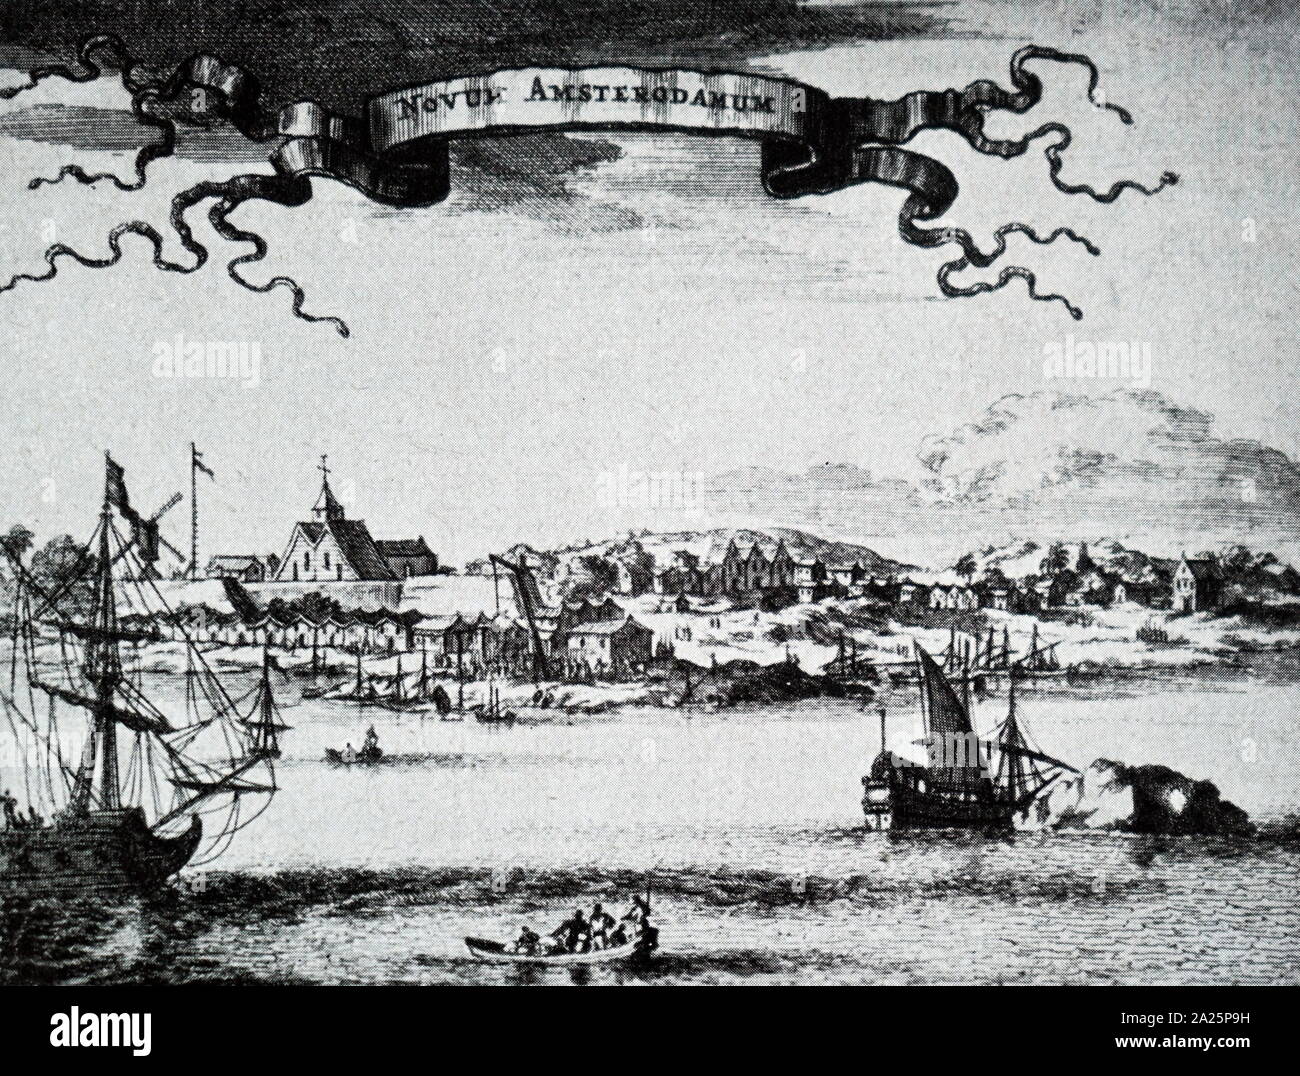 Woodcut engraving depicting a view of new amsterdam during the 17th century Stock Photo